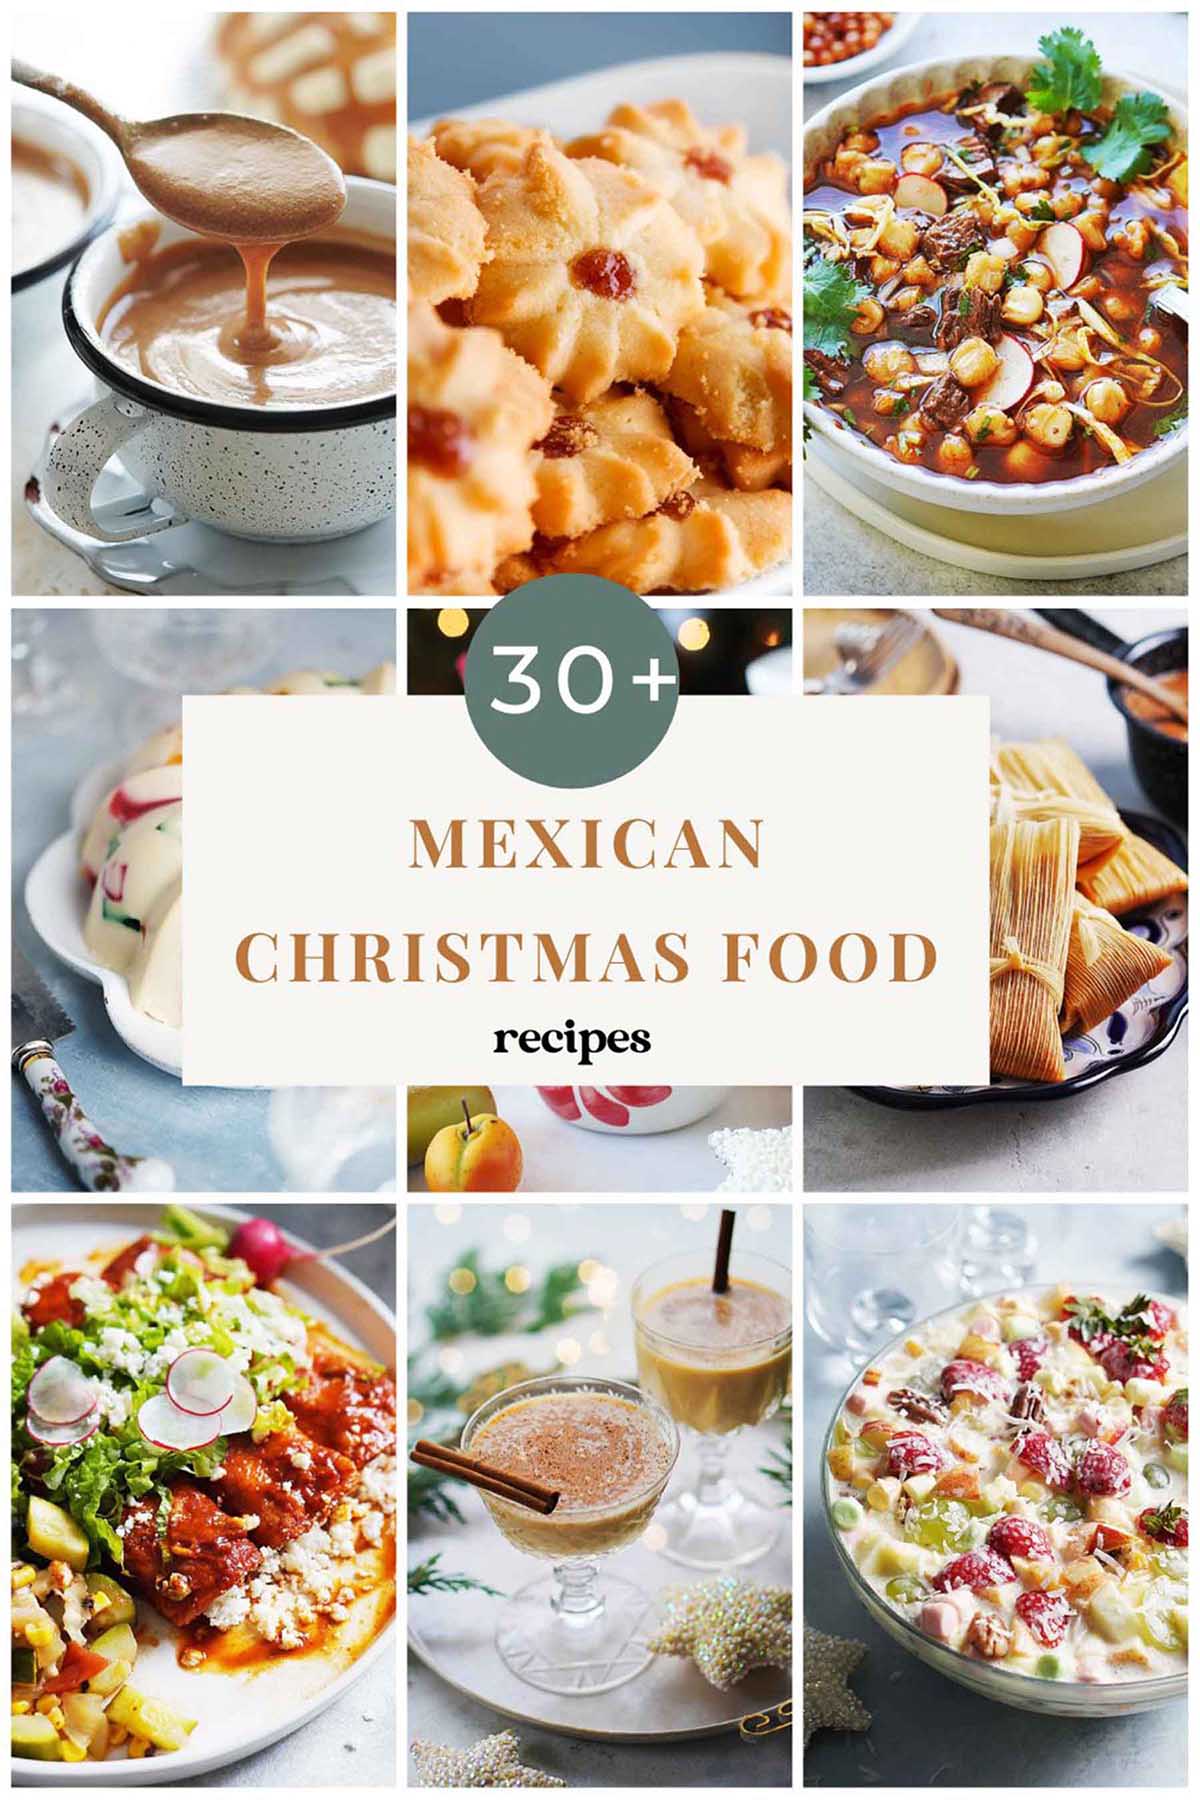 Collage of Mexican food images.